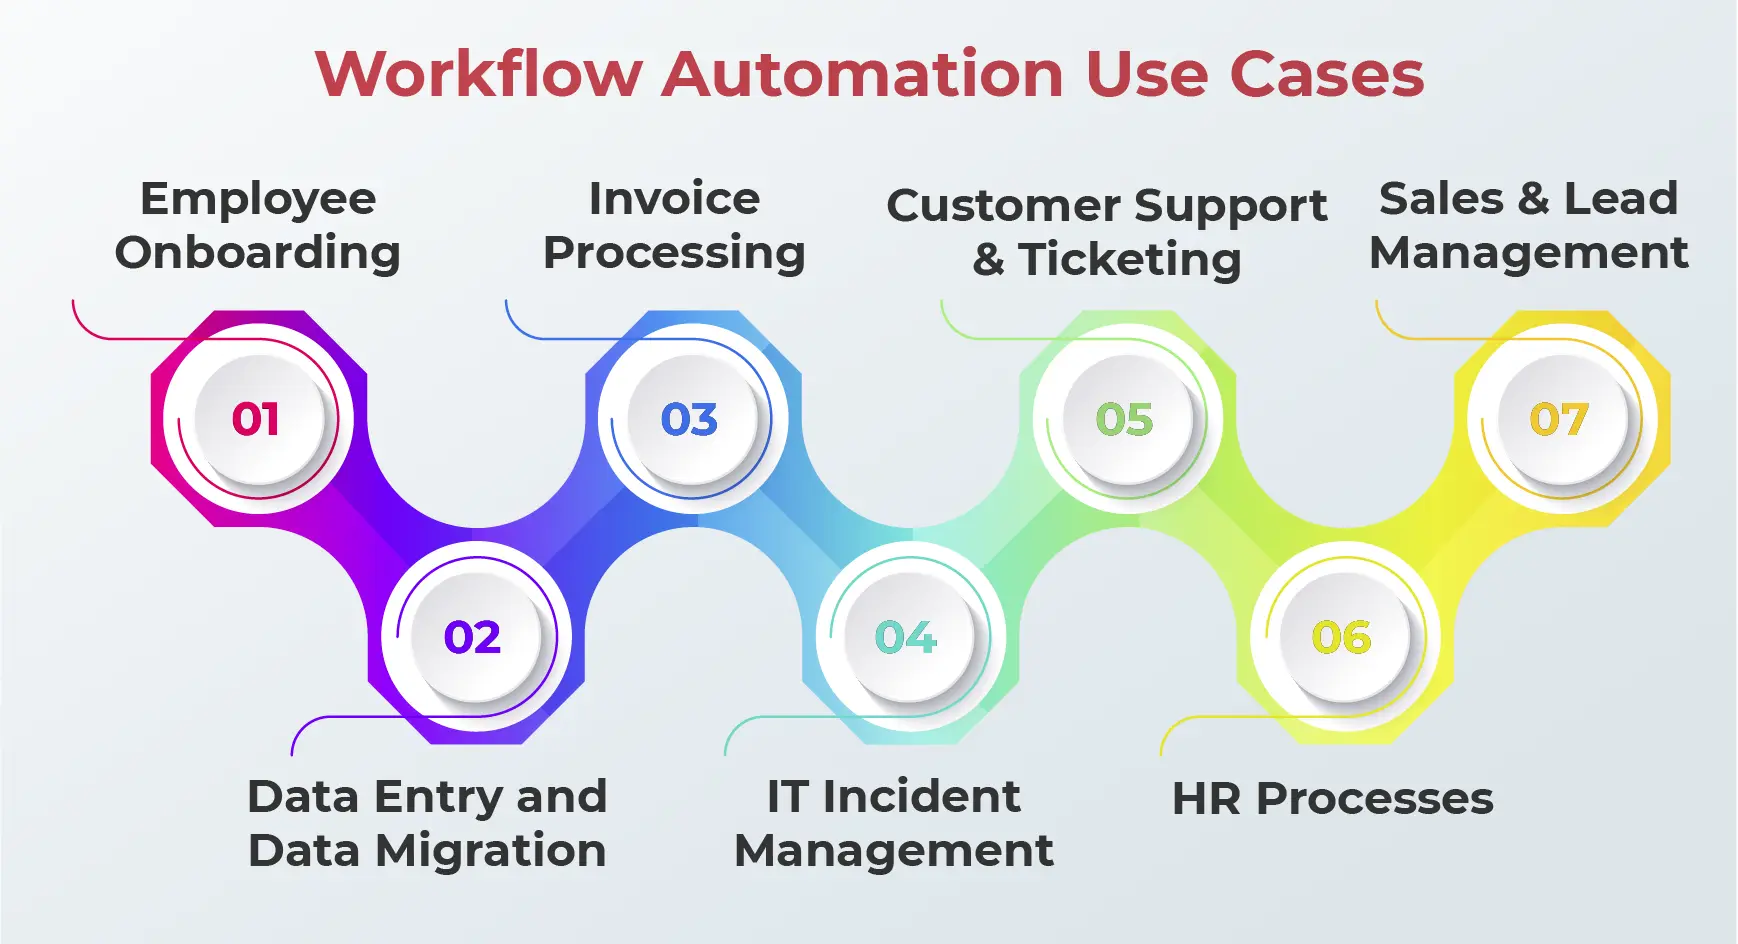 How can Workflow Automation Help?